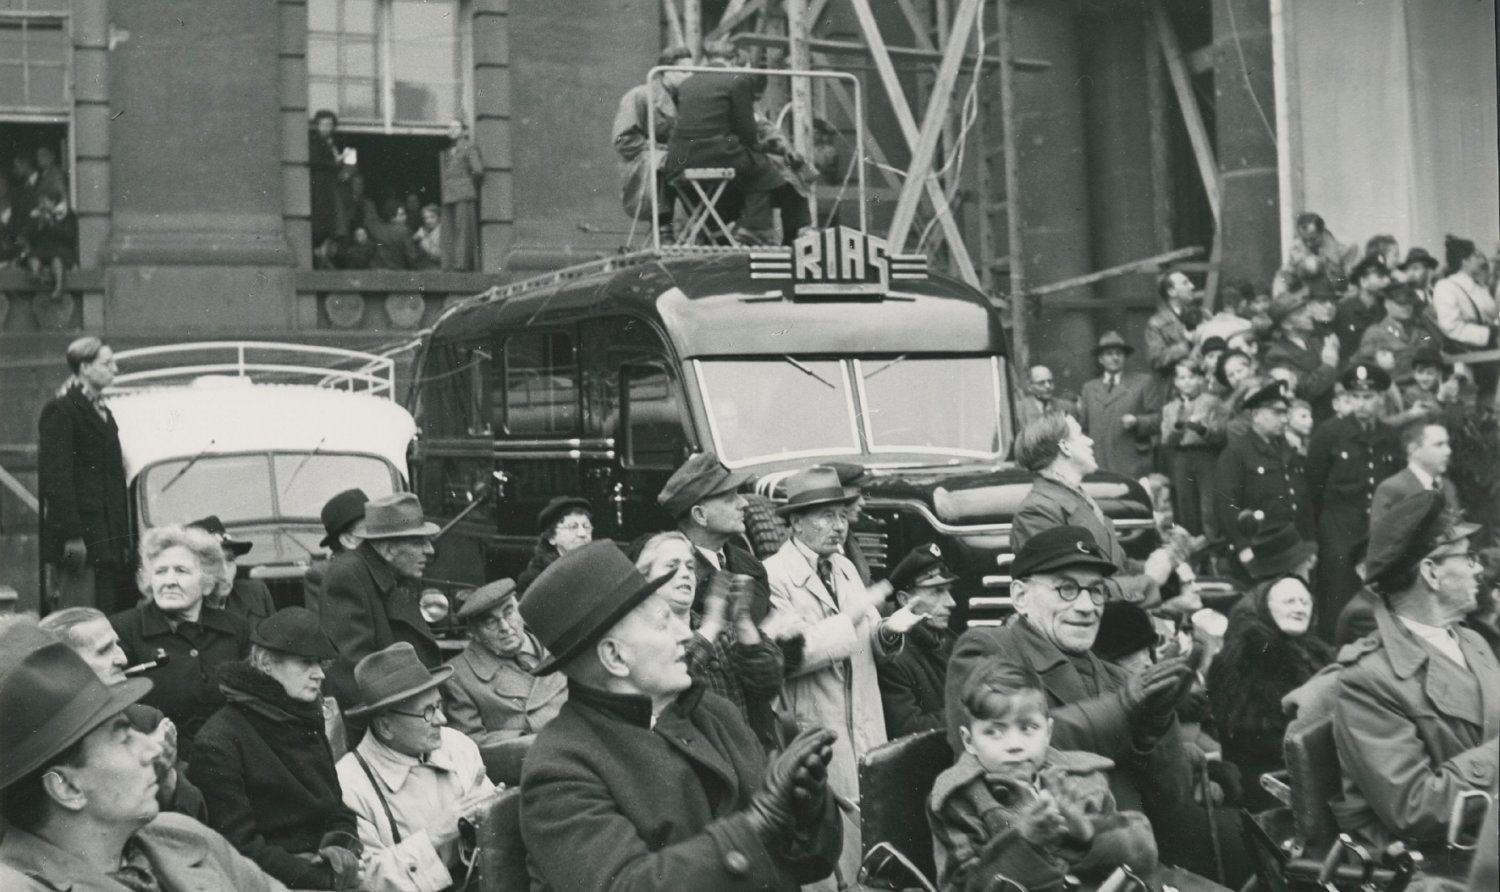 Enlarge photo: A crowd applauds, in the background there is a car with the inscription RIAS. 